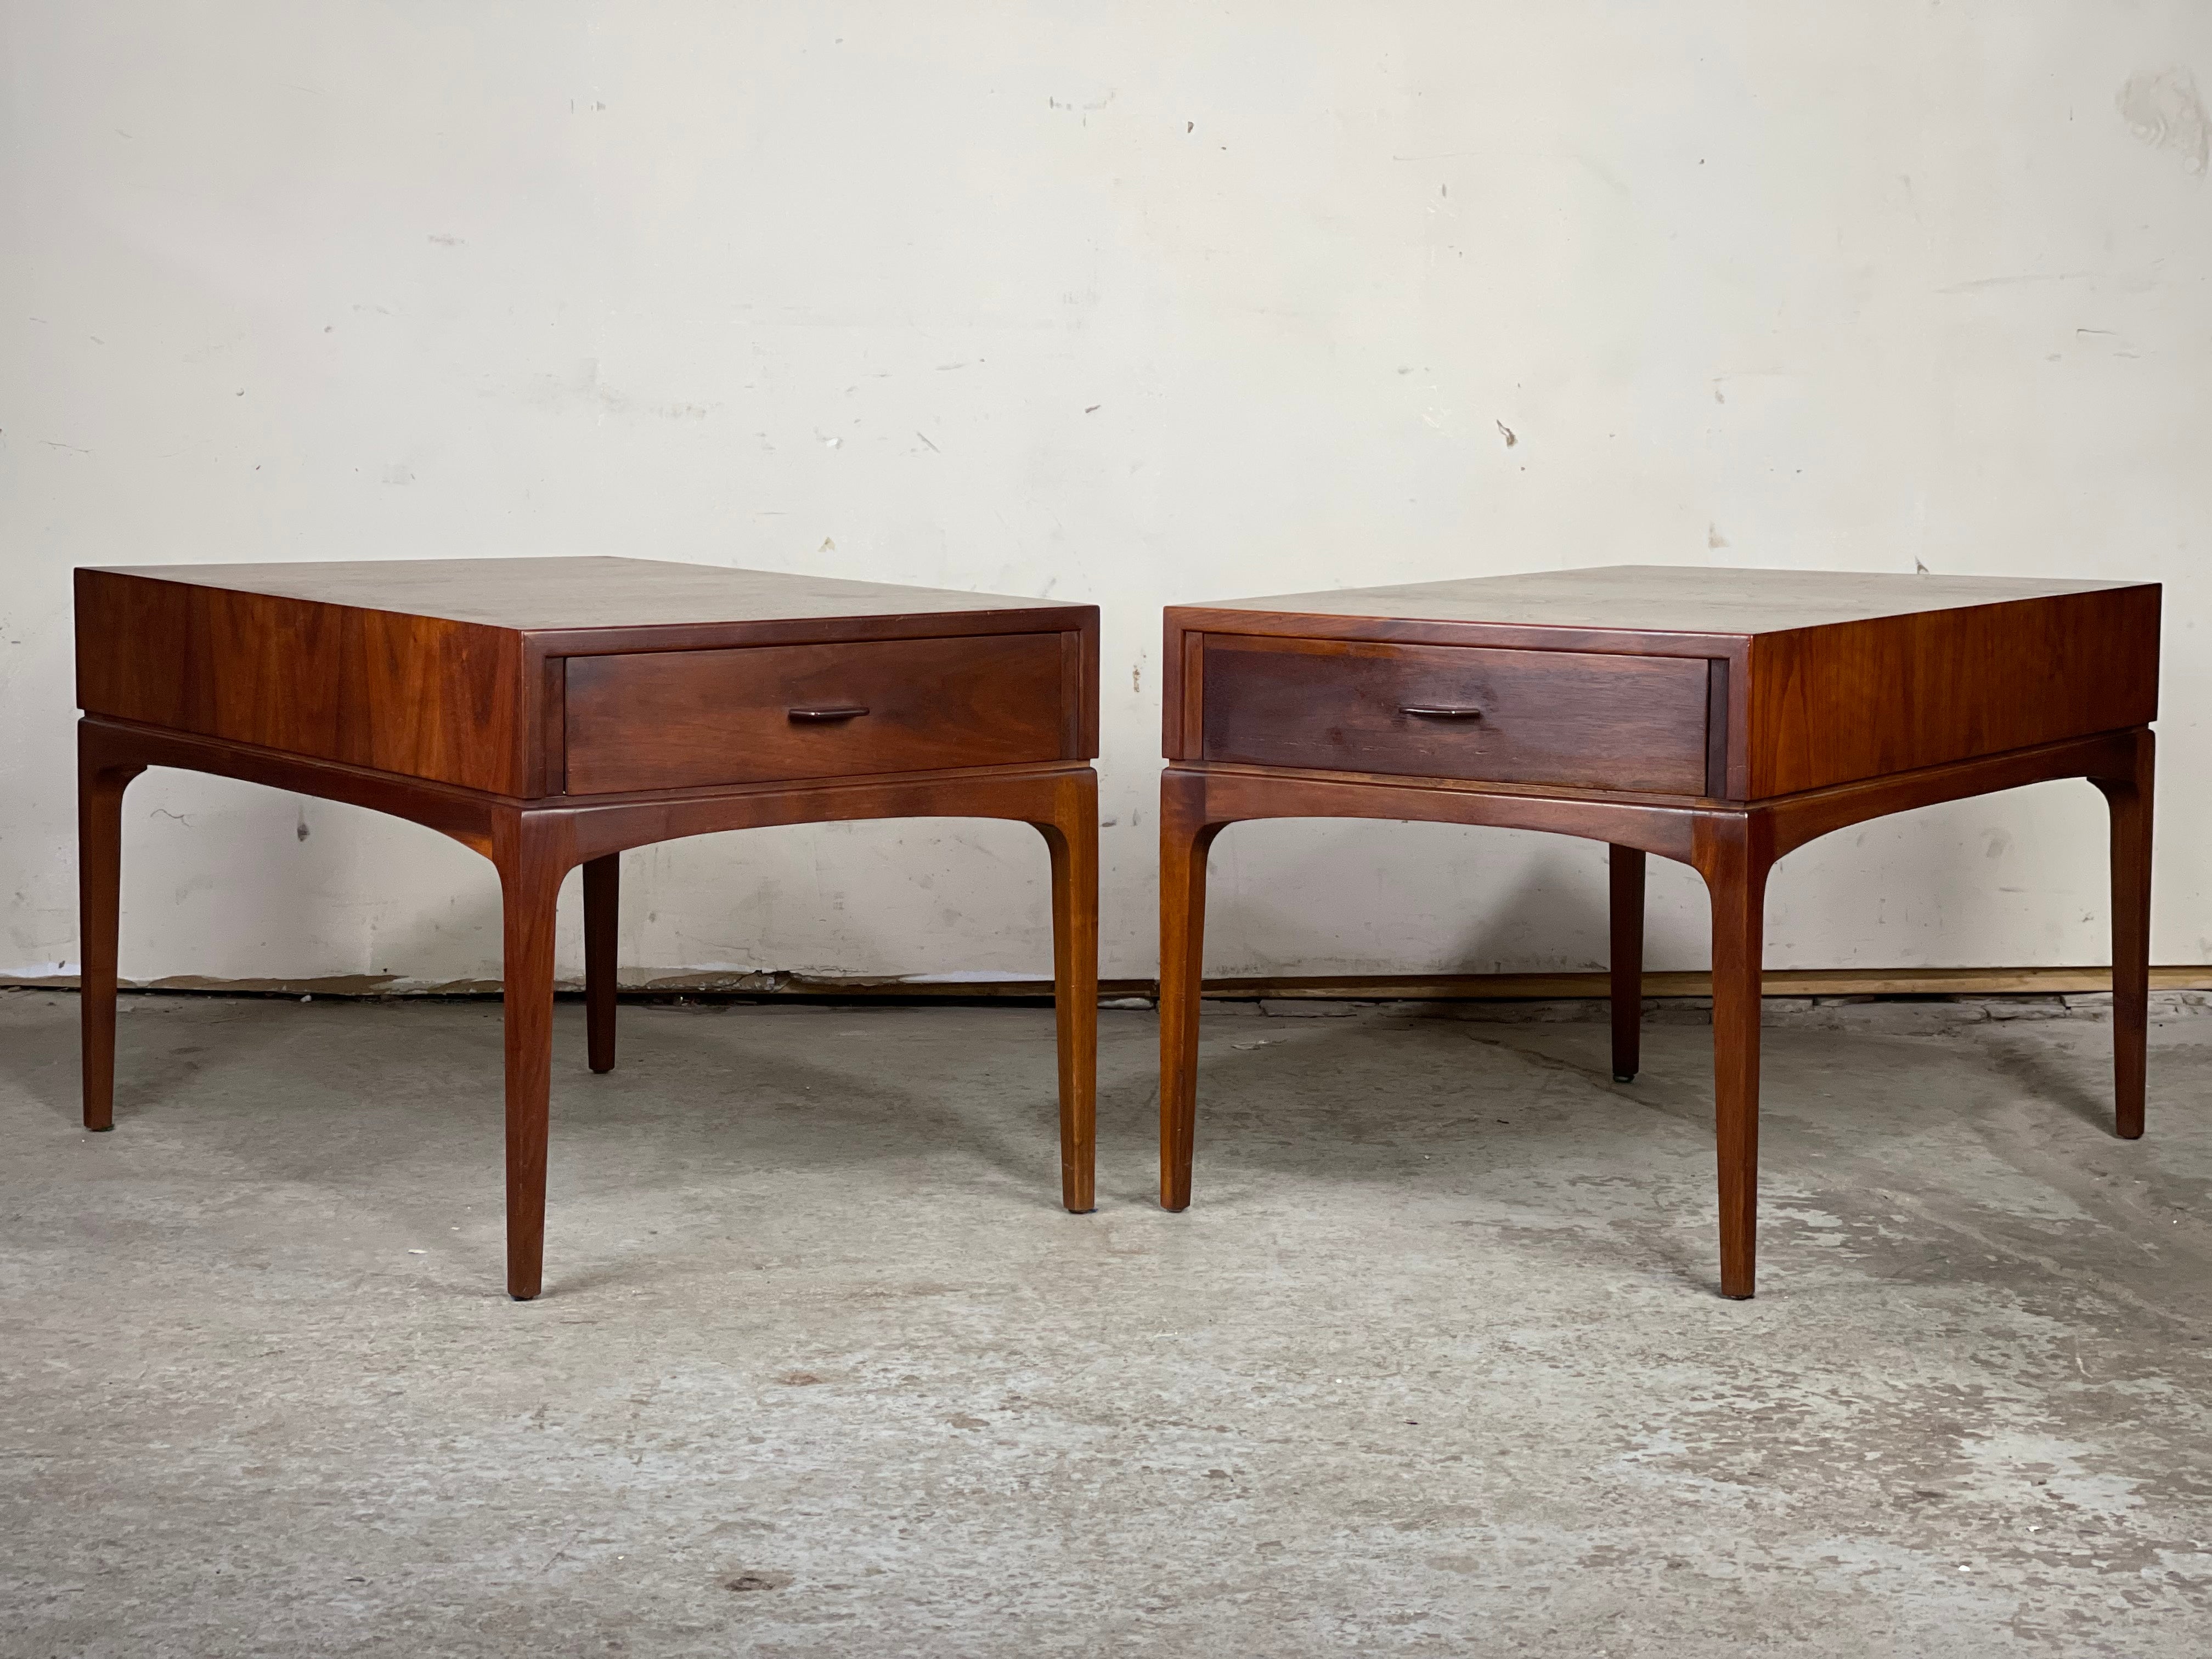 Mid-20th Century Rare Set of Mid-Century Modern Nightstands by Ace-Hi in Solid Walnut